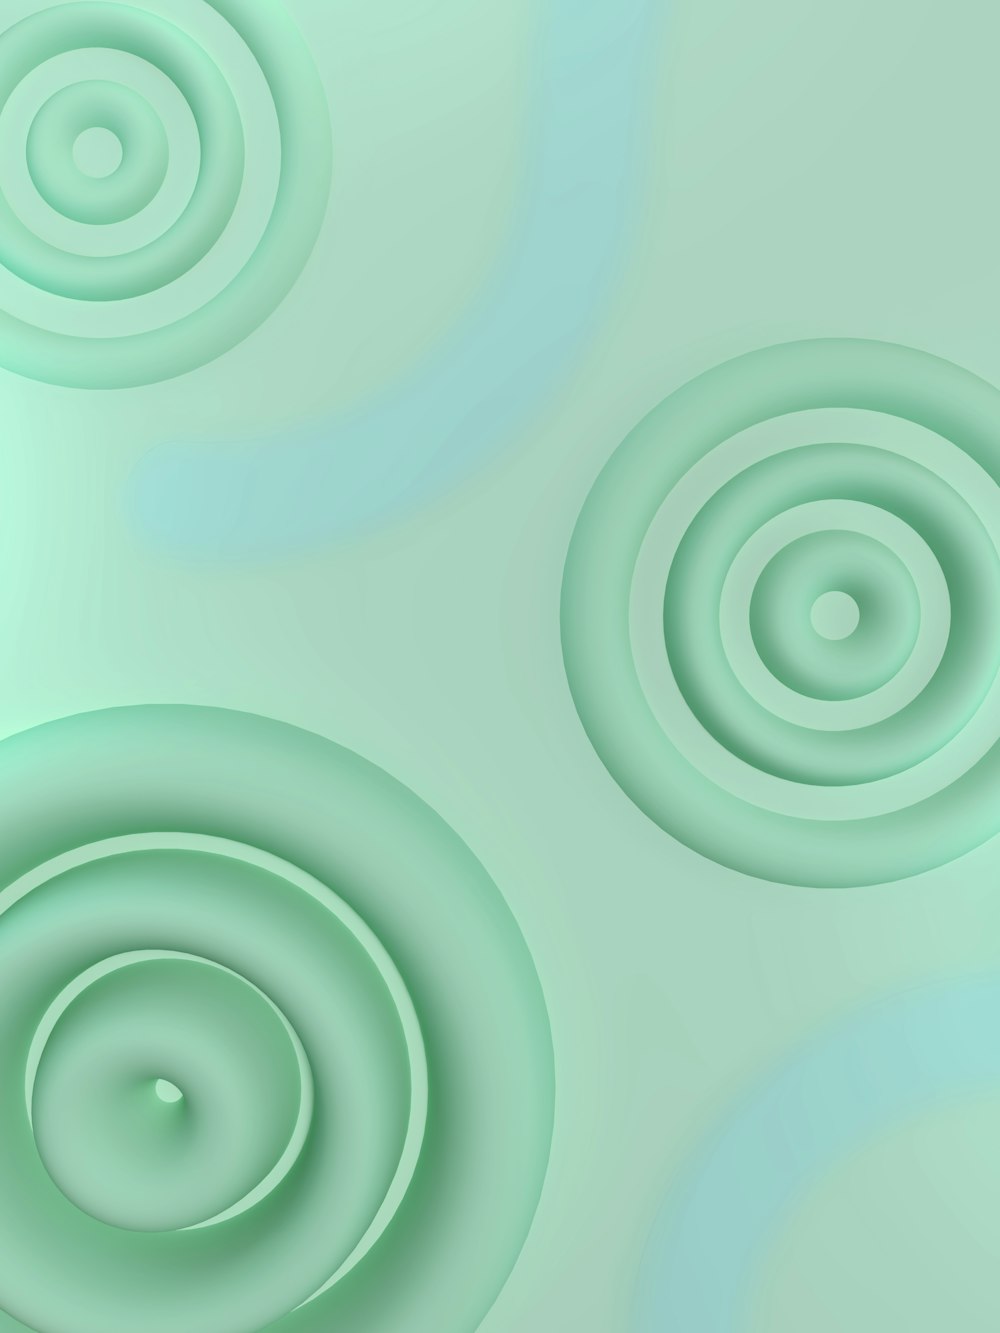 a green background with three circles in the middle